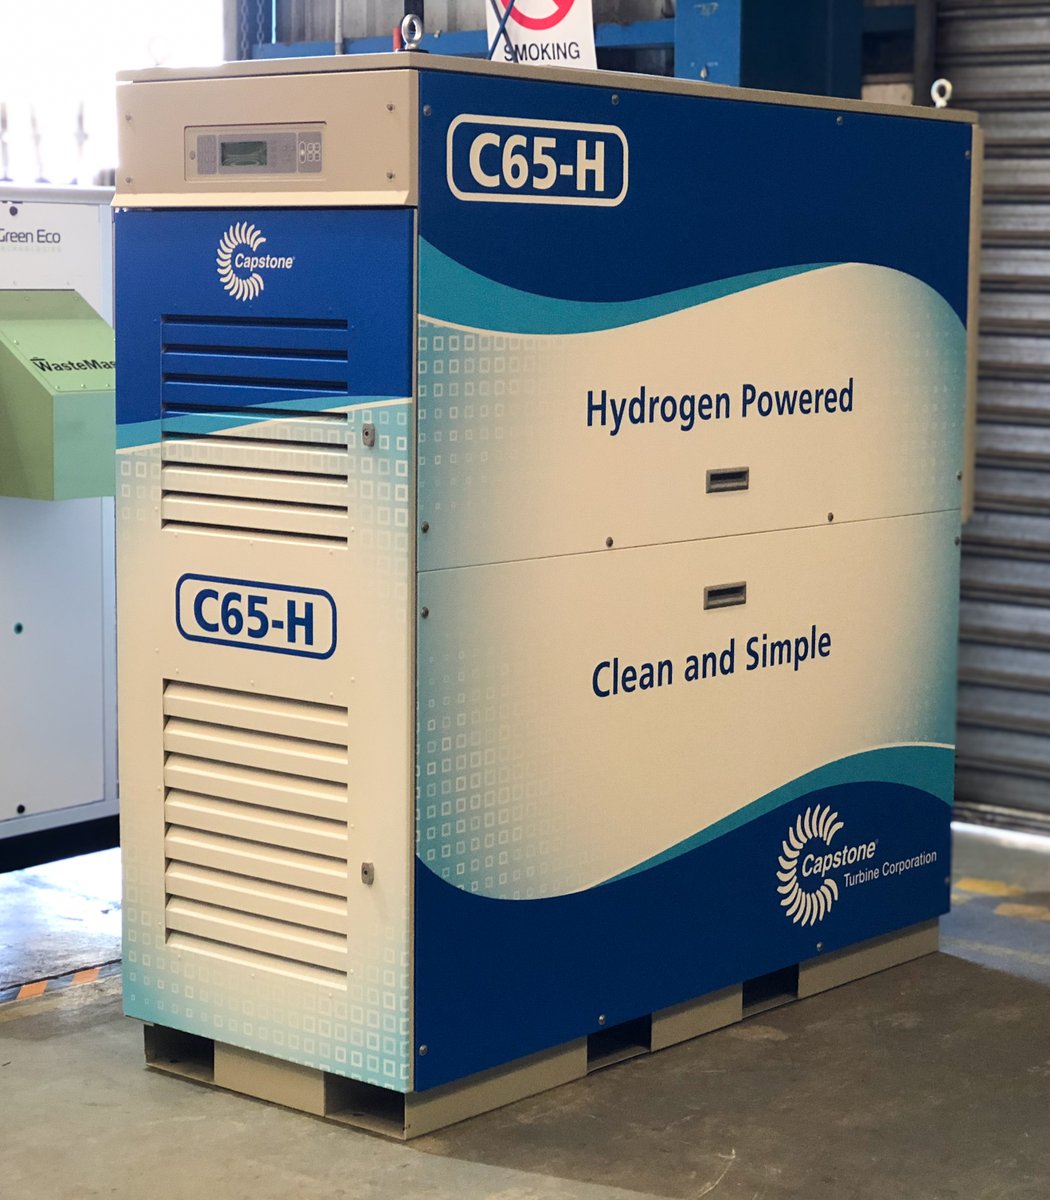 In 2021, we developed our 2nd @CGRNEnergy microturbine solution running on pure hydrogen for @blueeconomycrc, which focuses on the intersection of 2 emerging ocean-related sectors: aquaculture & offshore renewable energy production. #HydrogenInnovation